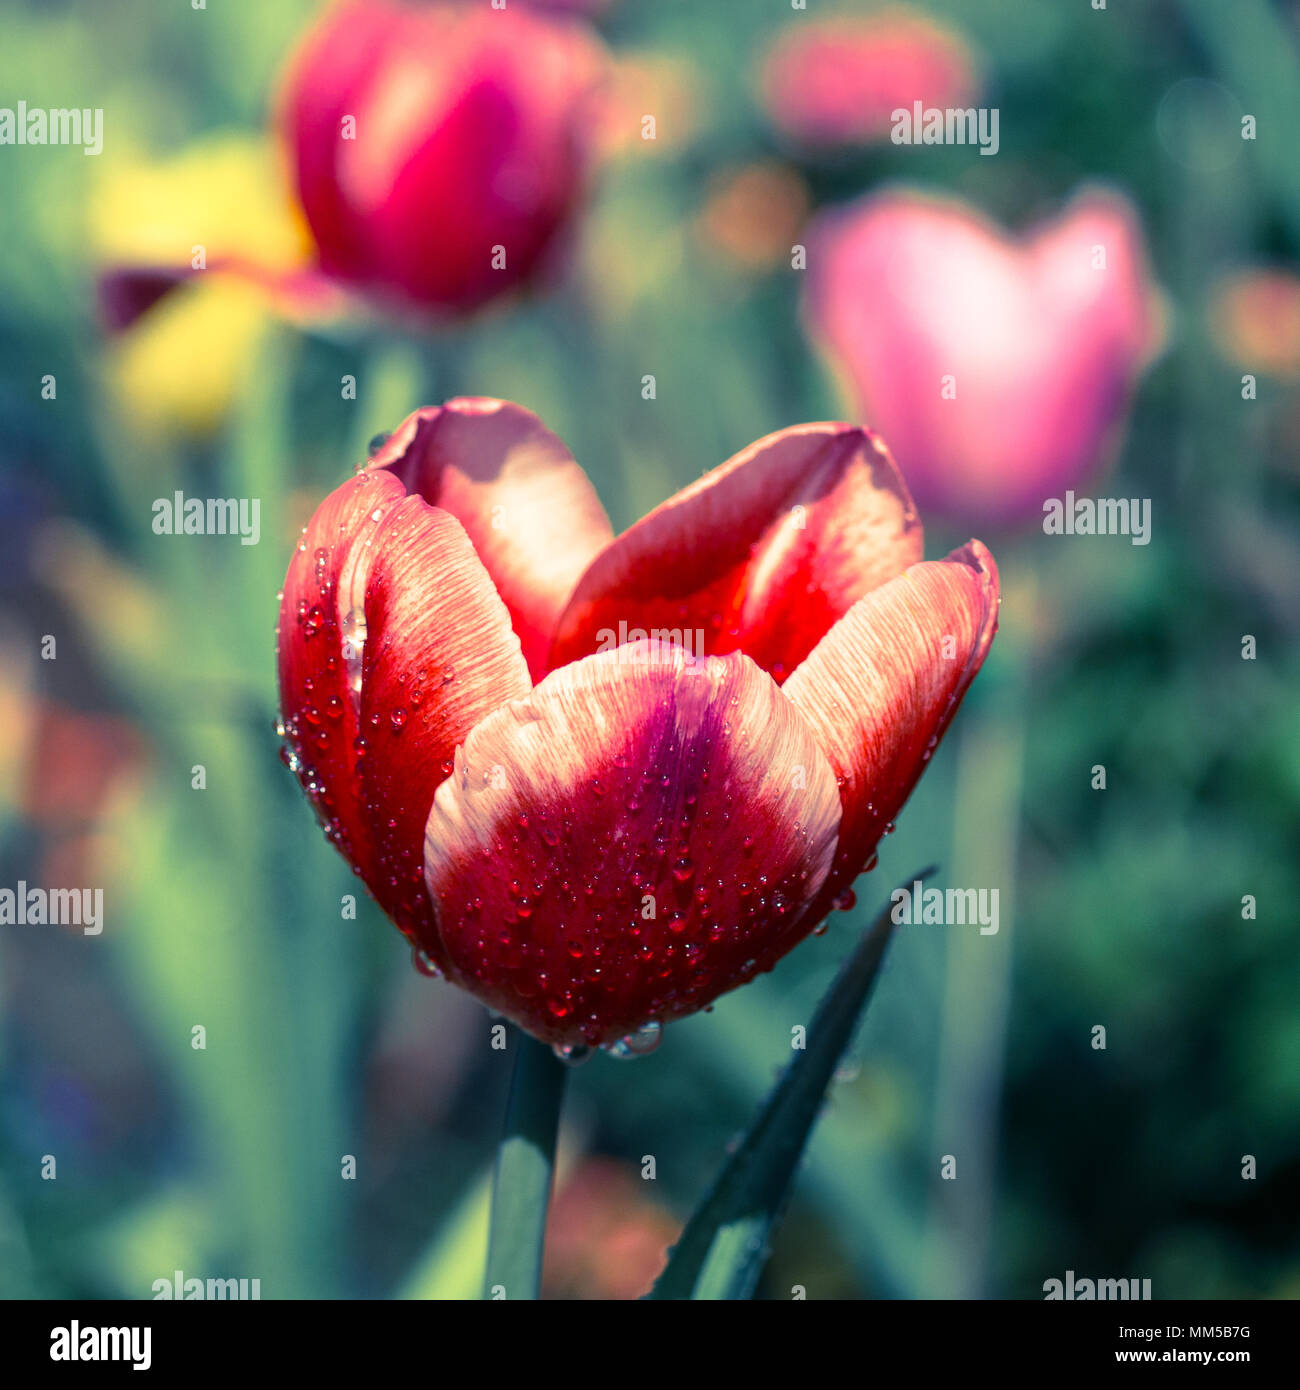 Tulips in the garden with retro filter effect Stock Photo